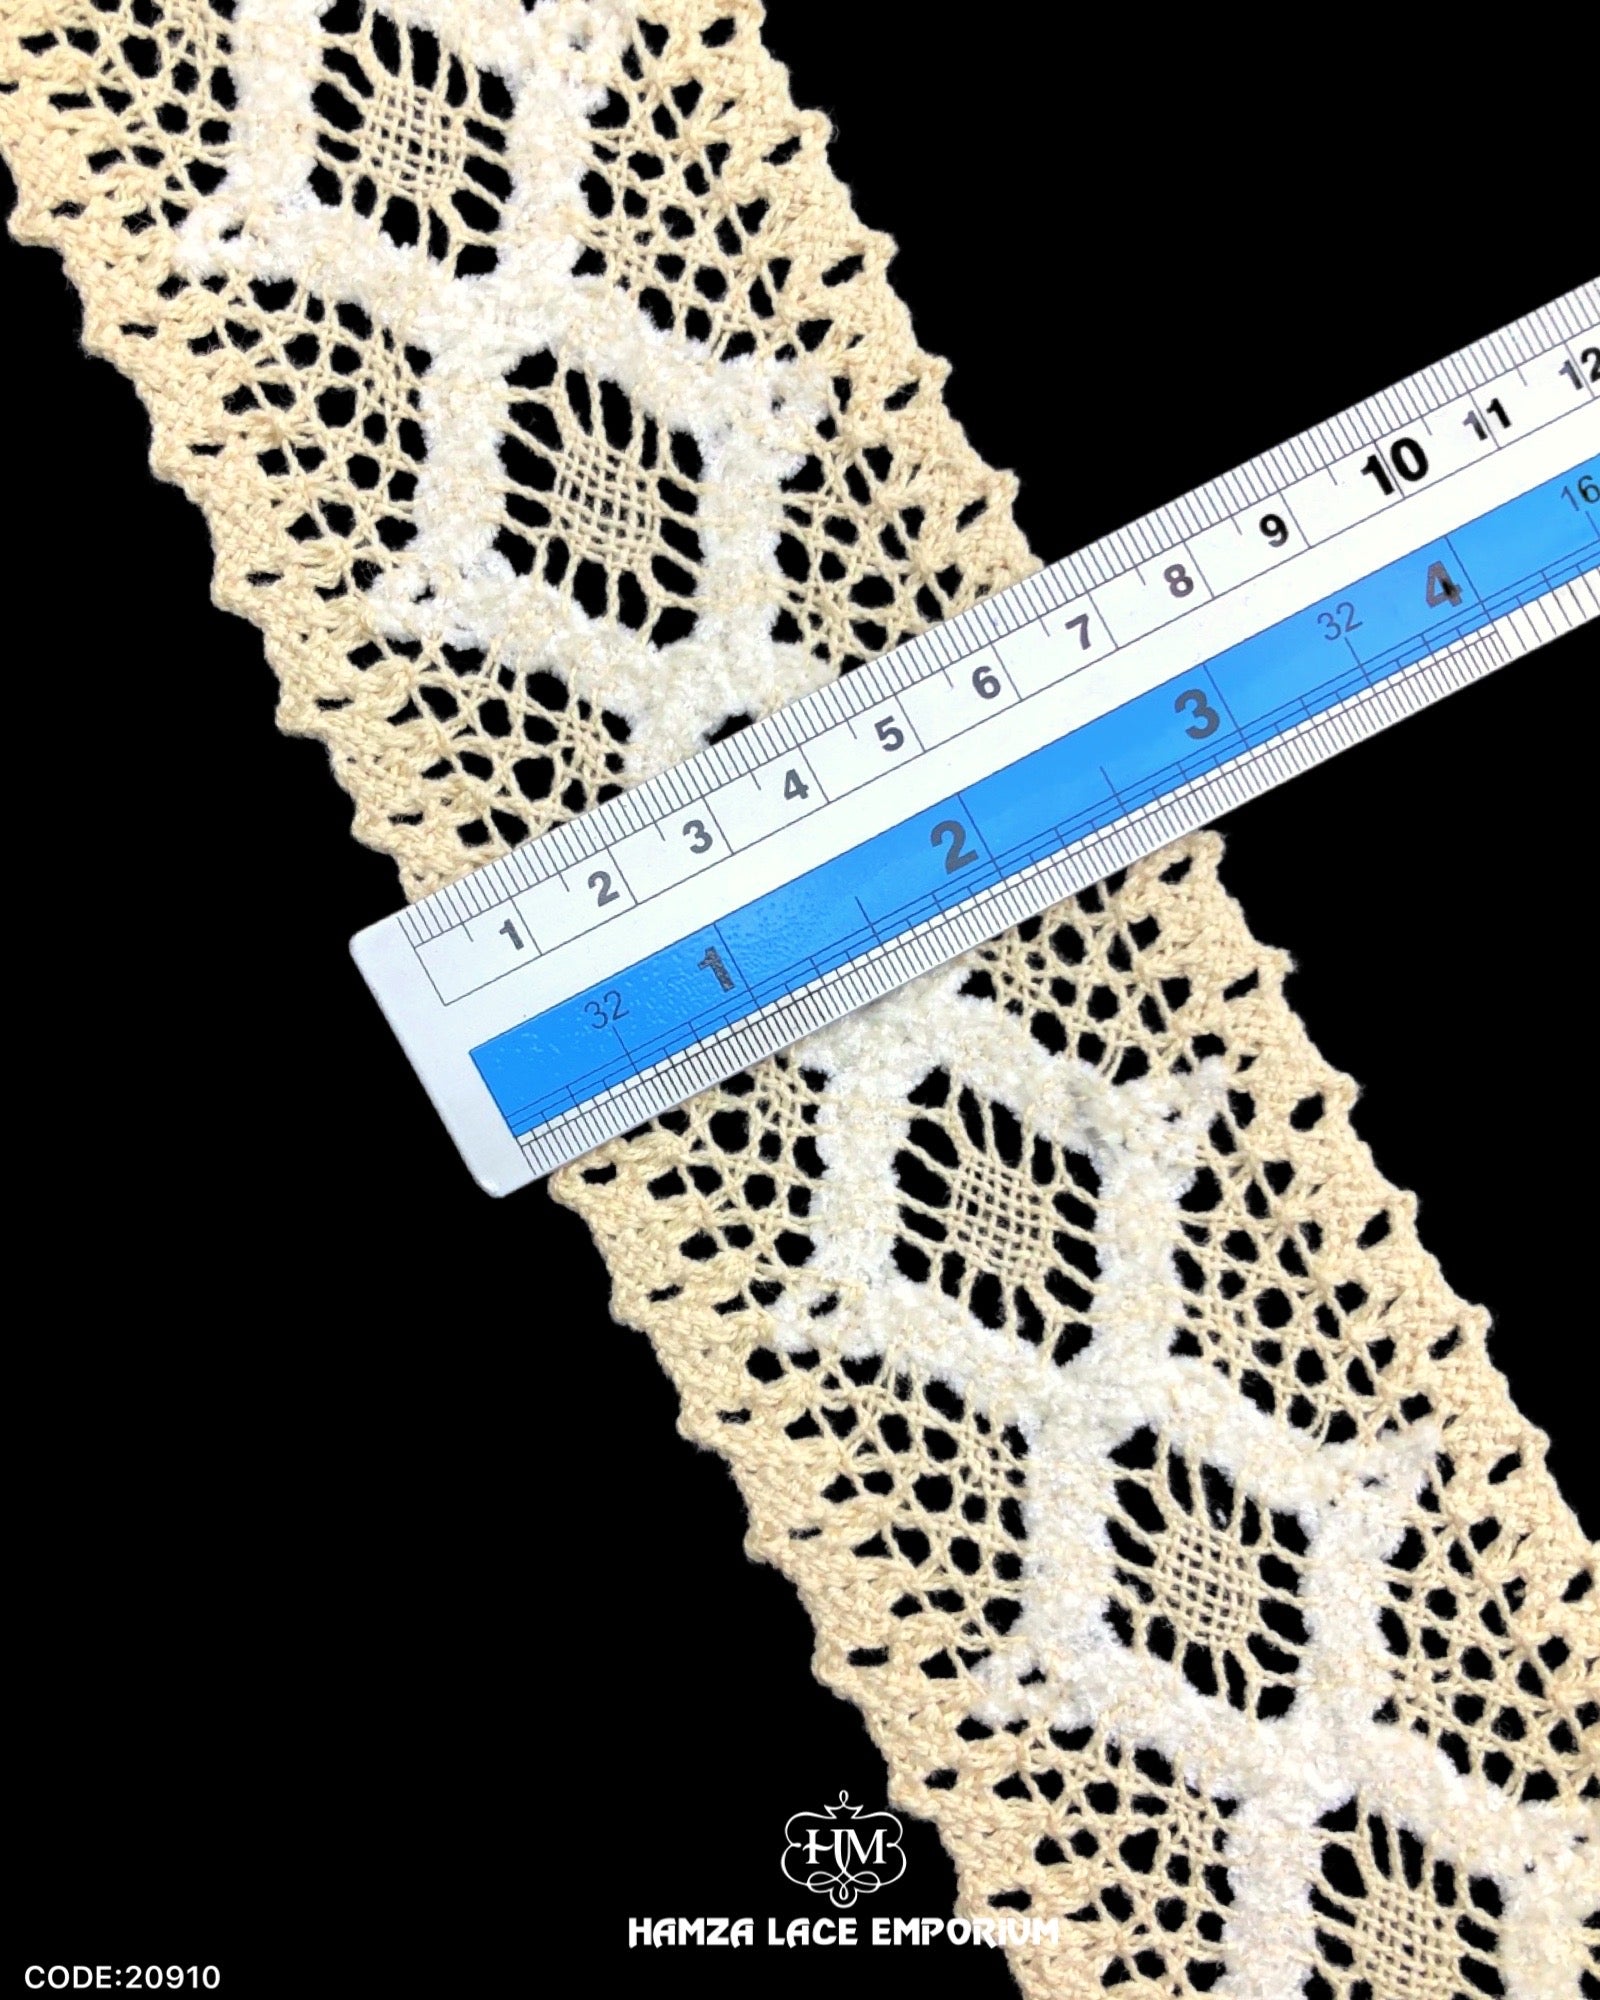 Size of the 'Center Filling Crochet Lace 20910' is shown with the help of a ruler as '2.25' inches